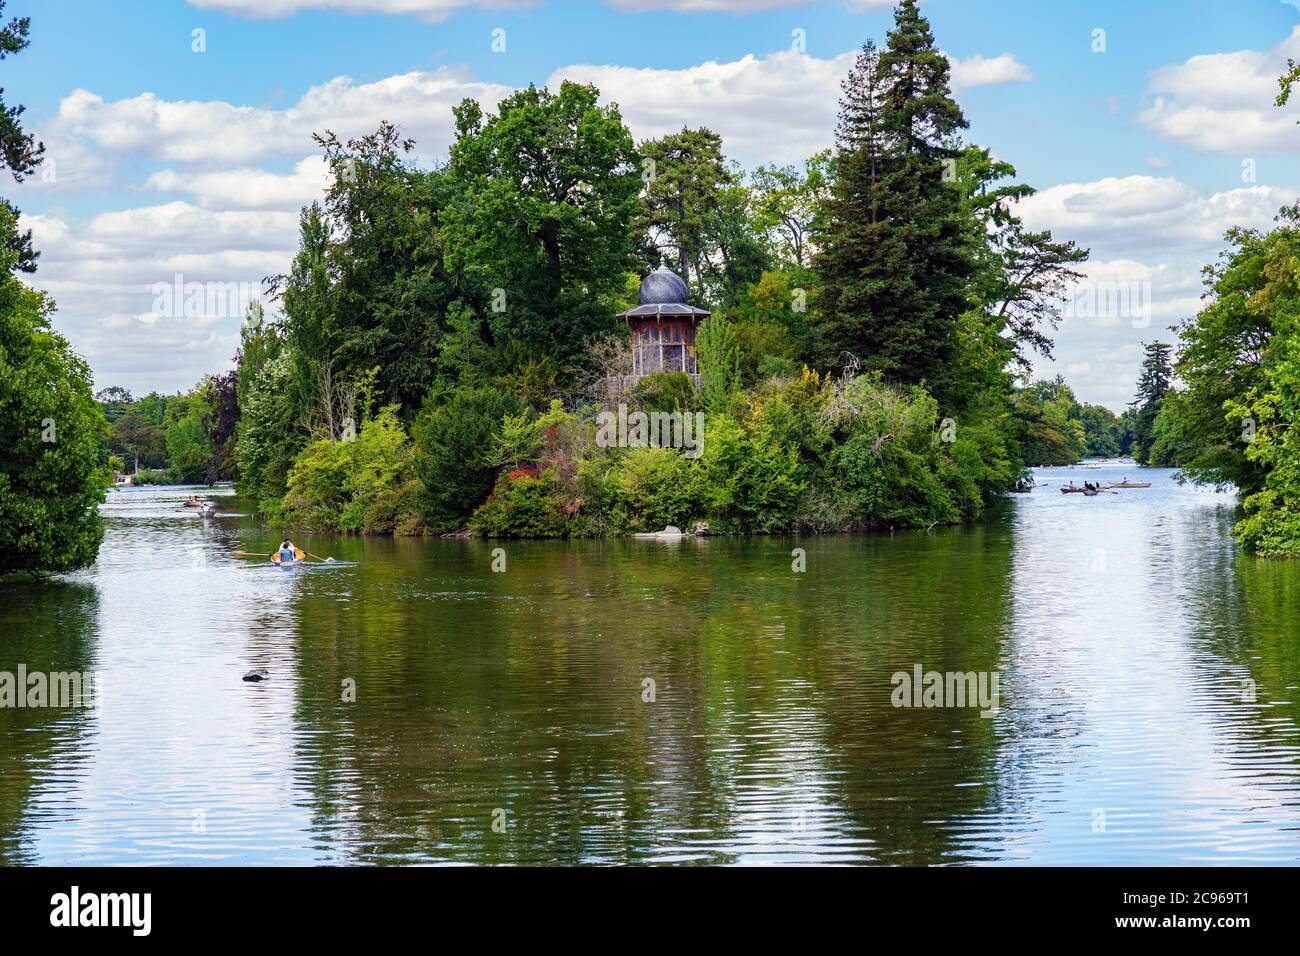 People boating near Kiosk of the Emperor in the Bois de Boulogne - Paris, France Stock Photo